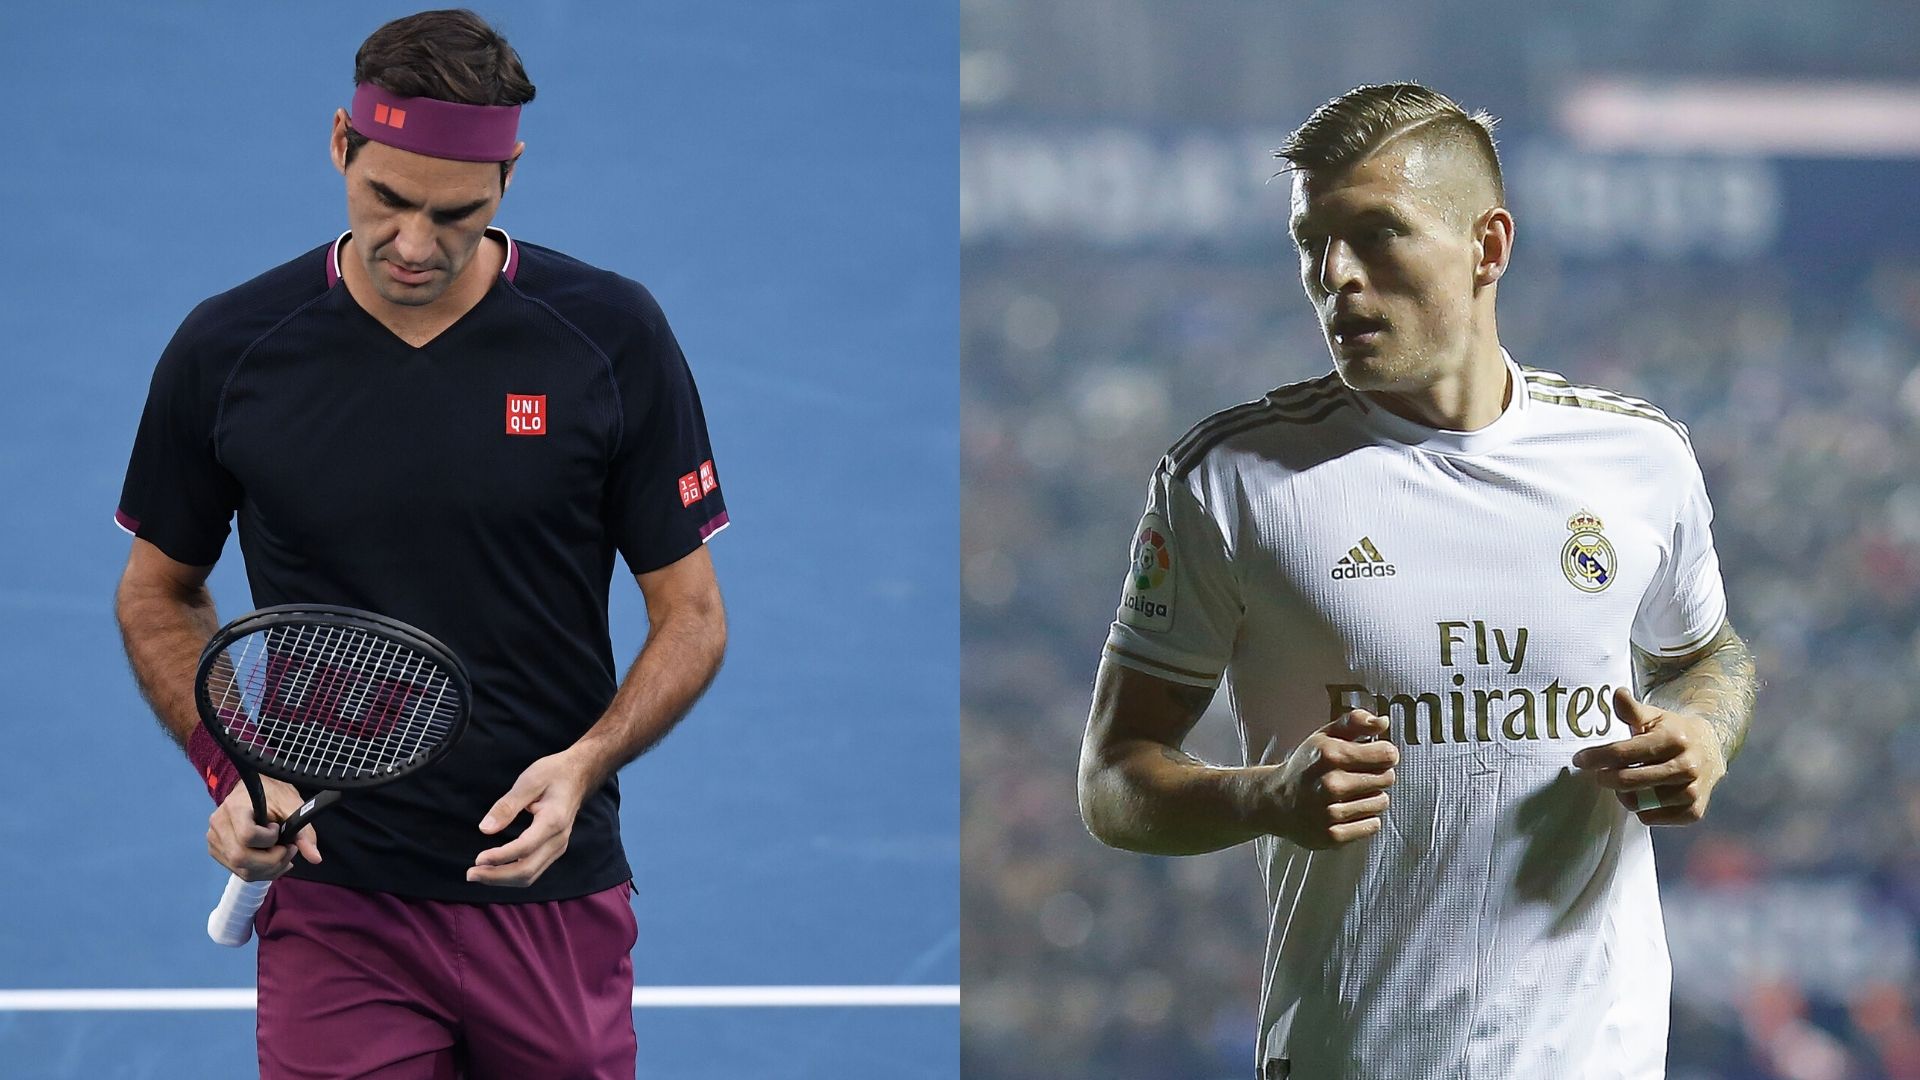 Roger Federer started a new challenge which was accepted by Toni Kroos